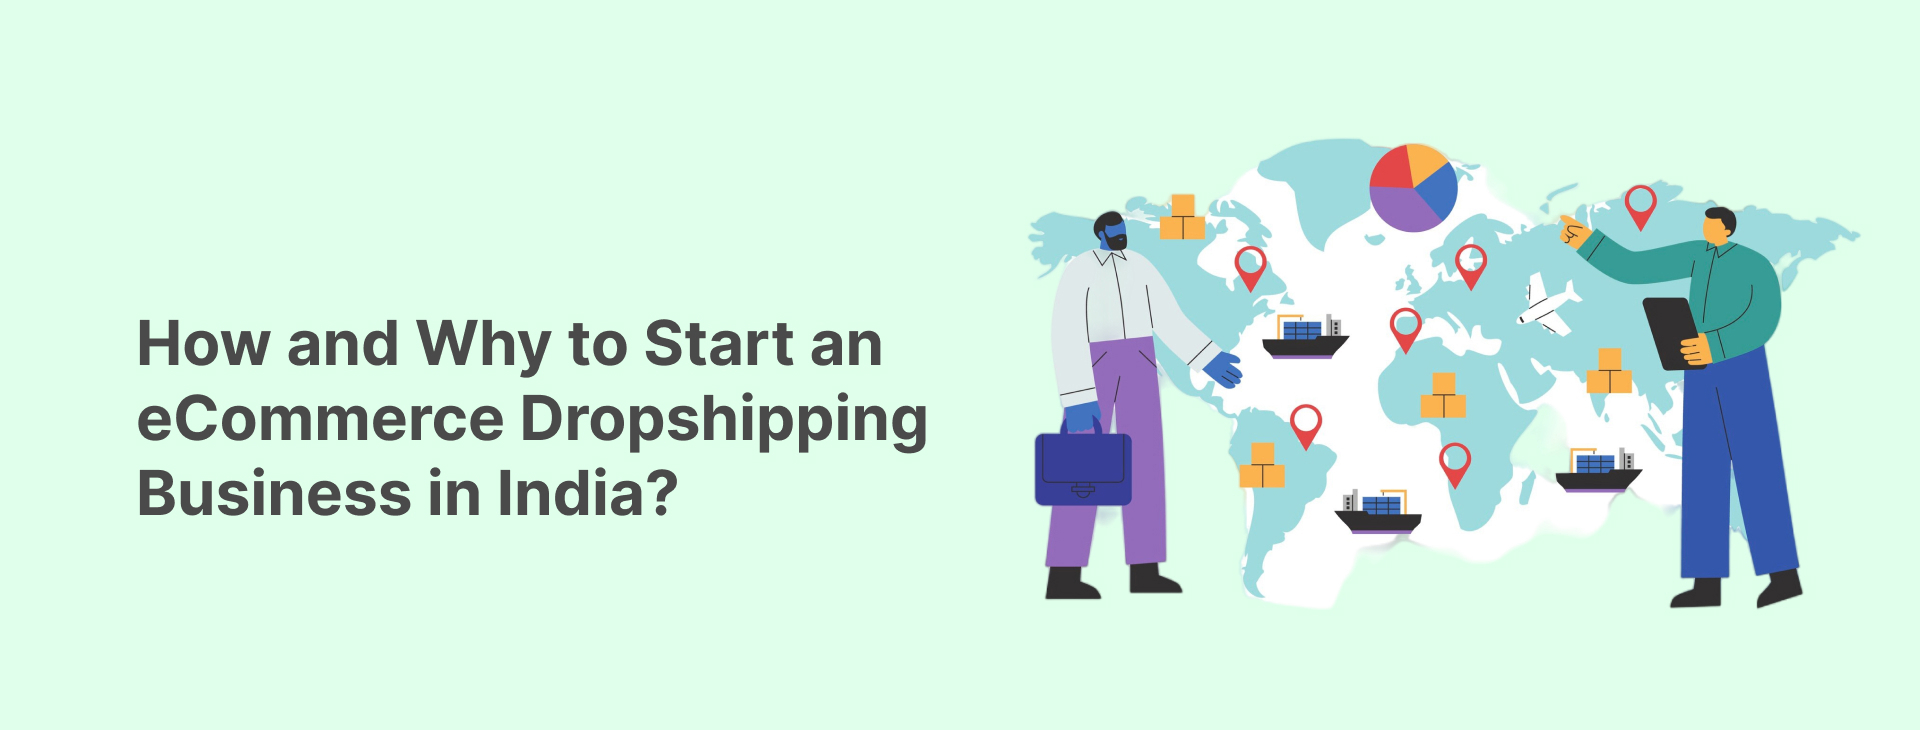 How and Why to Start an eCommerce Dropshipping Business in India